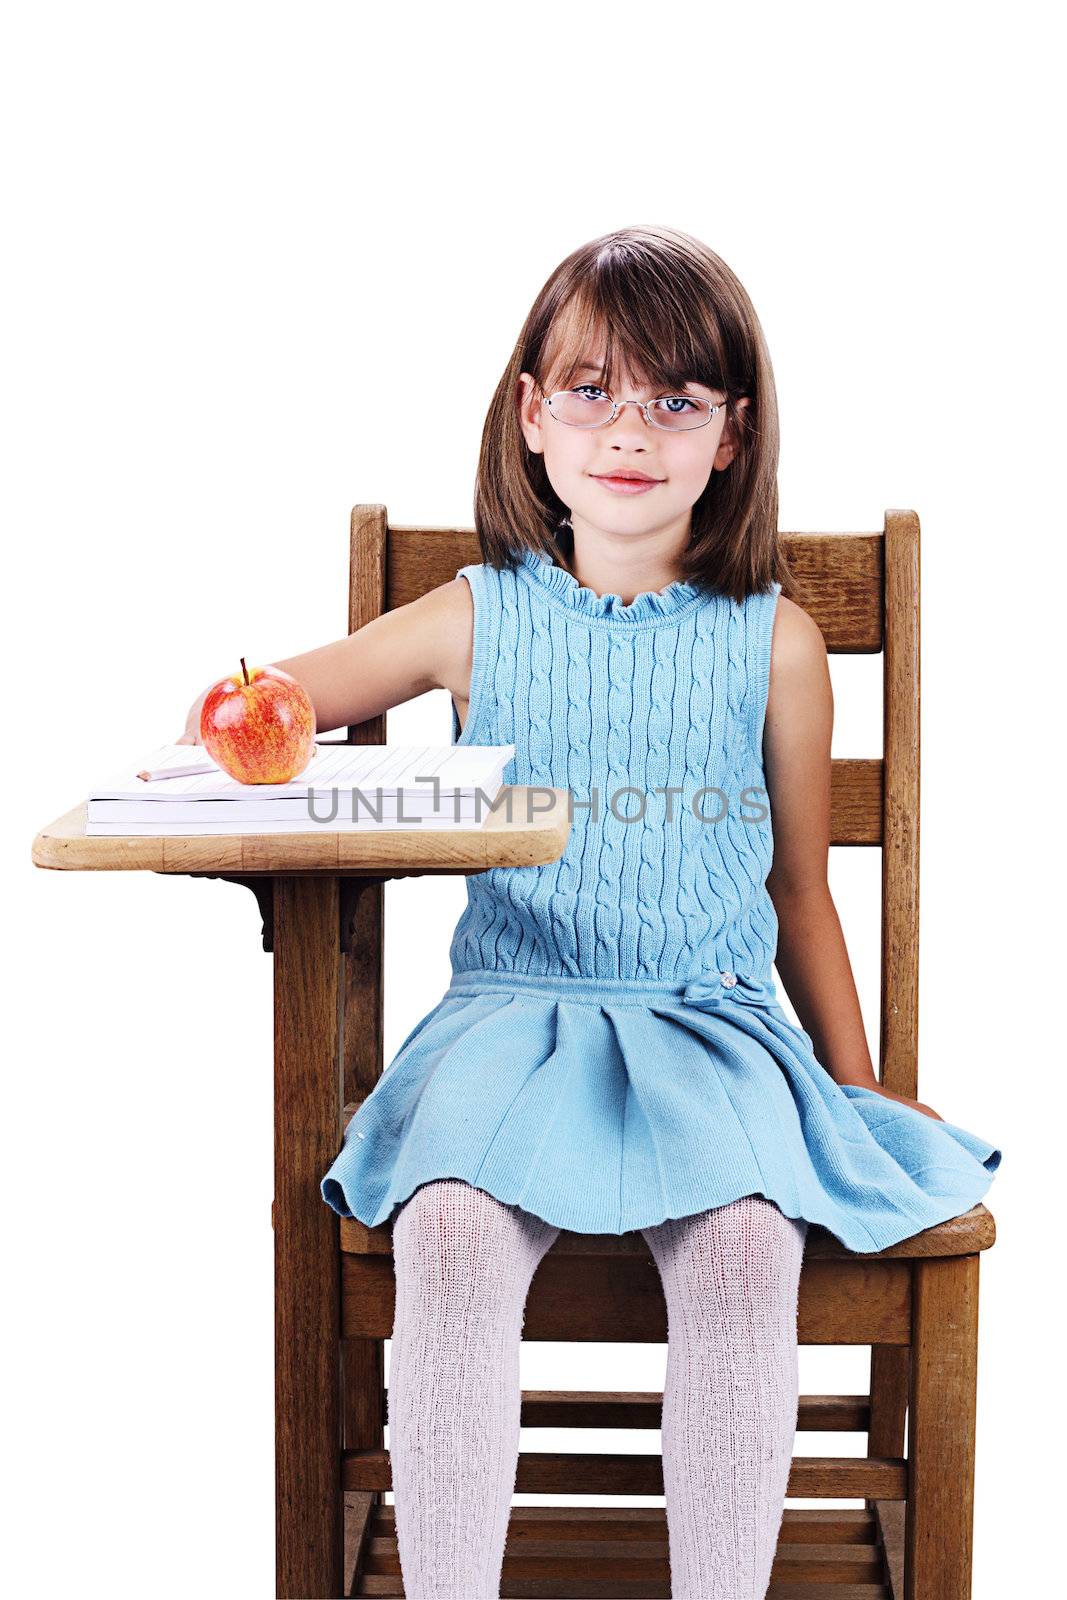 Little girl wearing glasses sitting at a school desk with apple and books. Isolated on a white background with clipping path included.